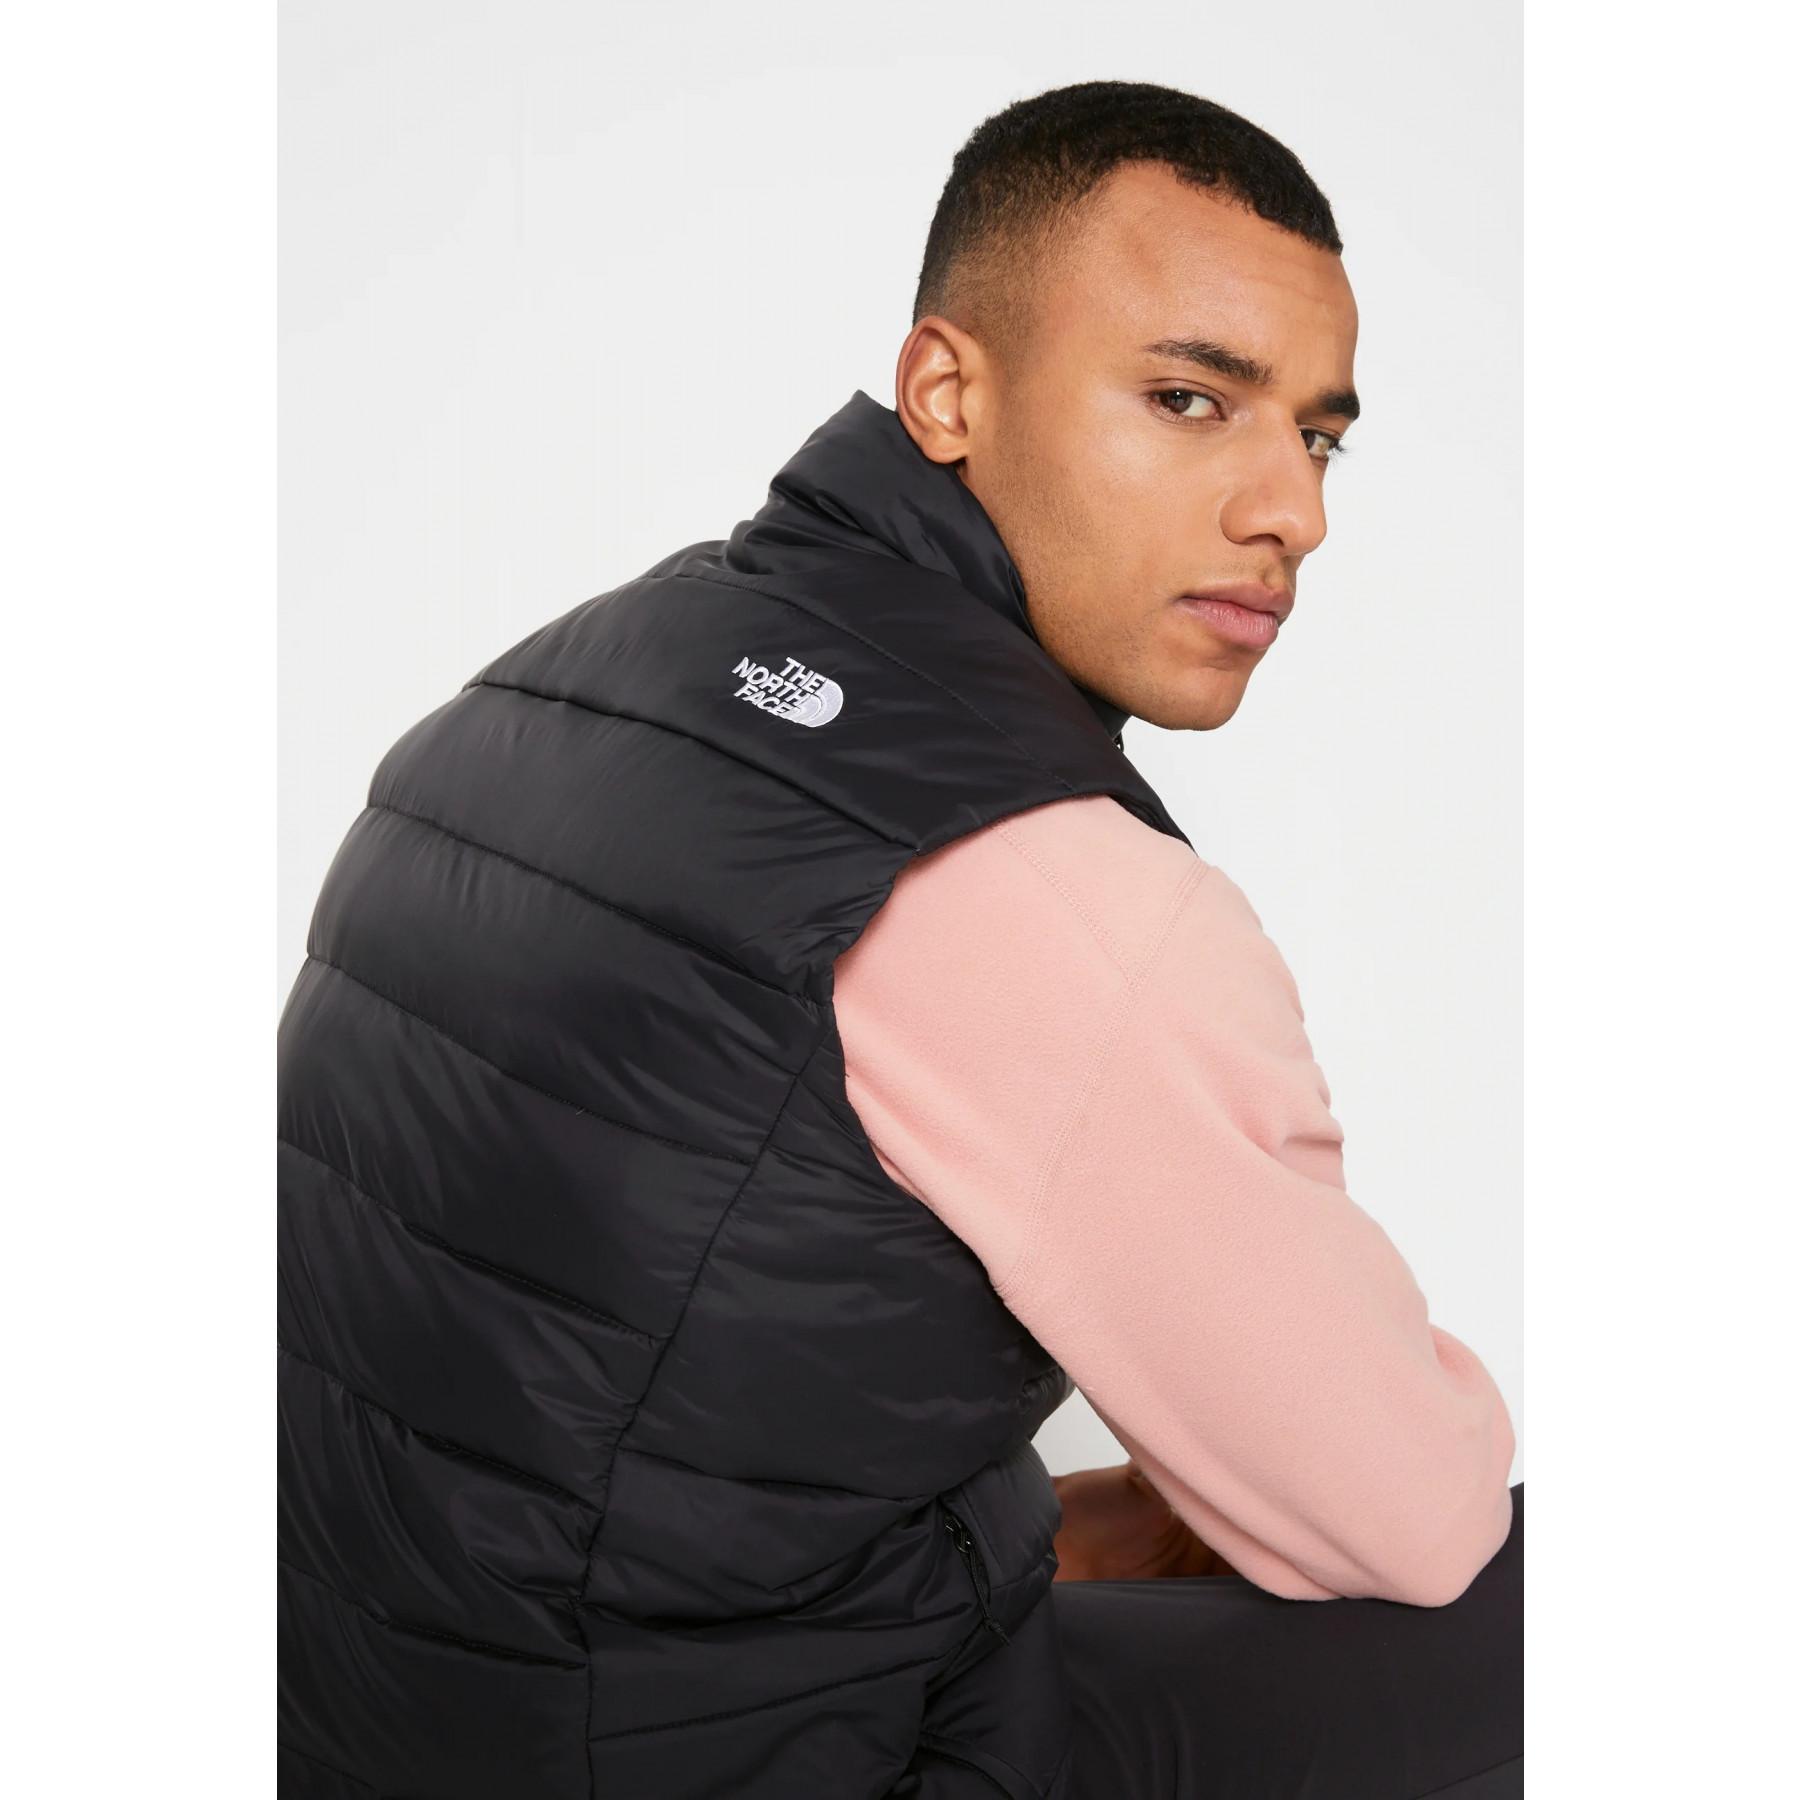 Sleeveless jacket The North Face Insulated